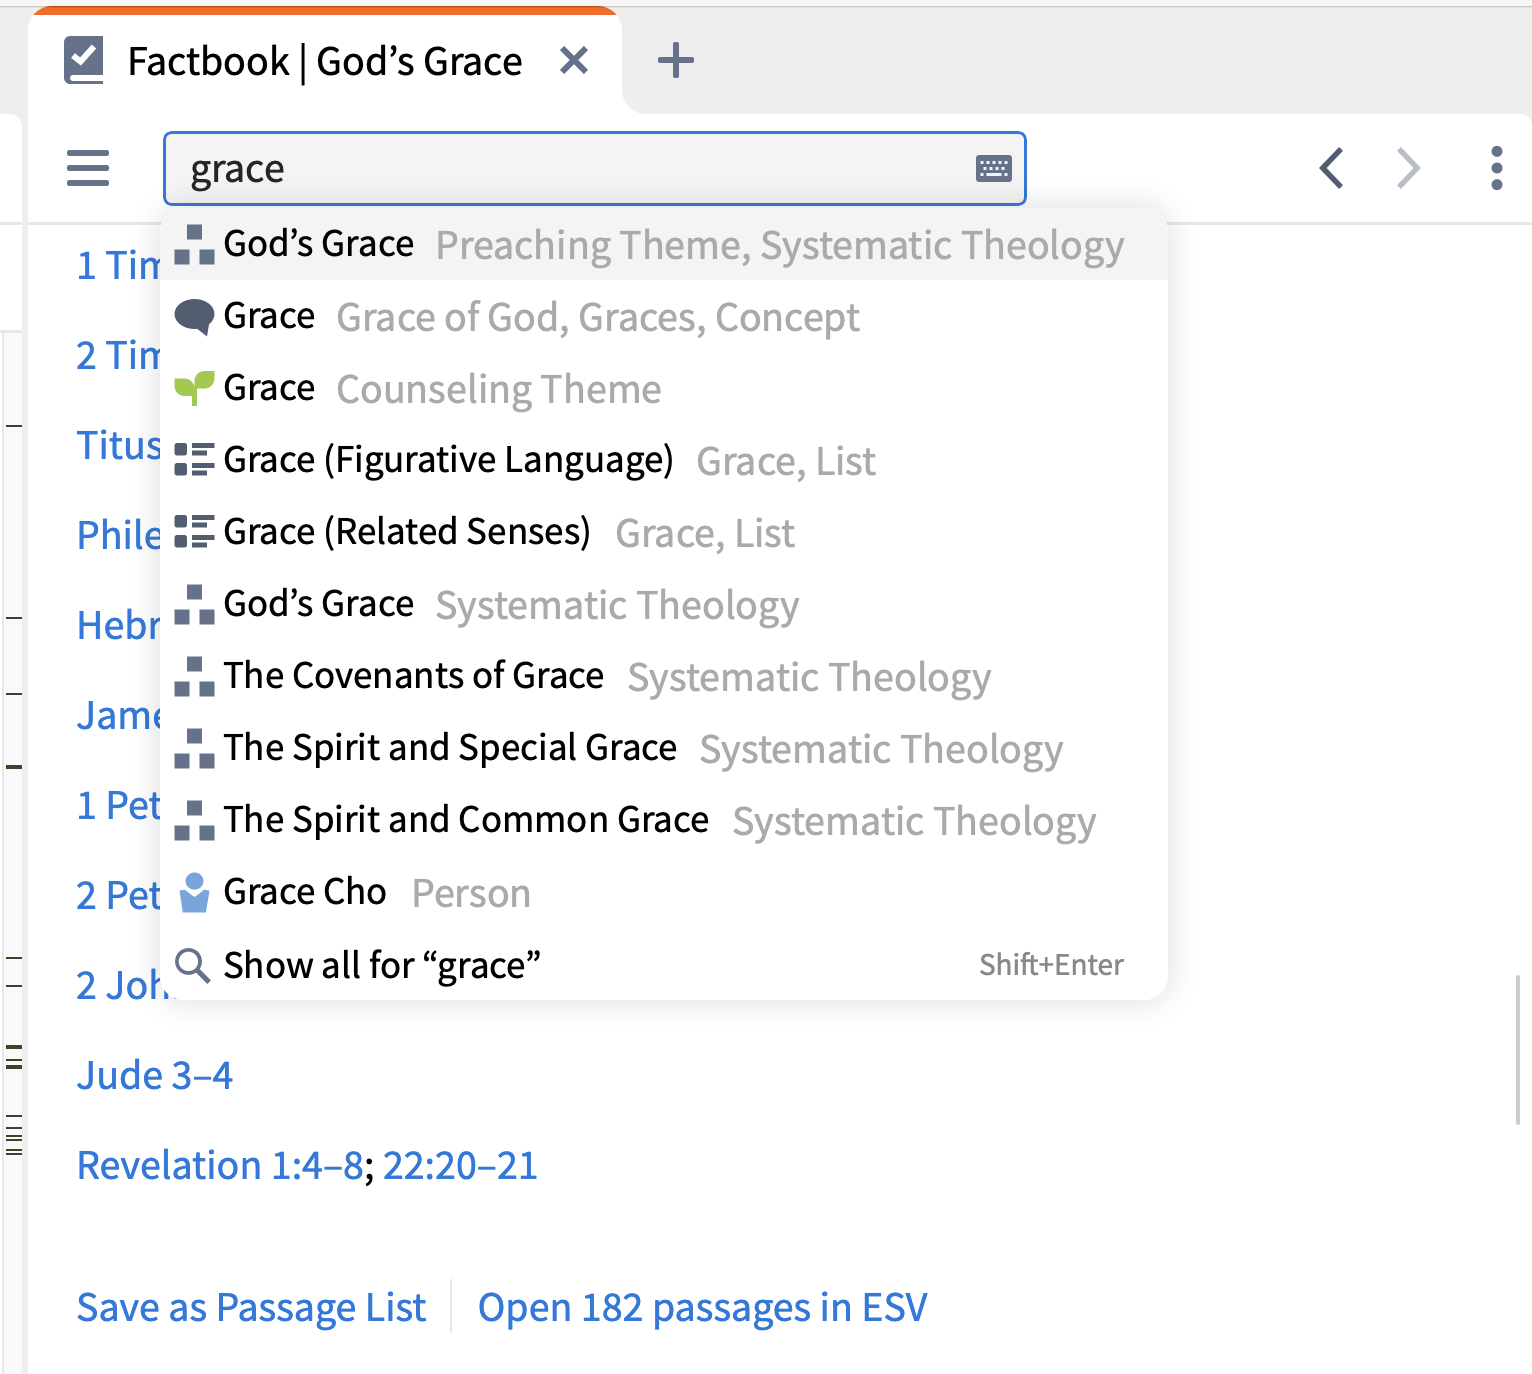 options to study grace from the Factbook in Logos